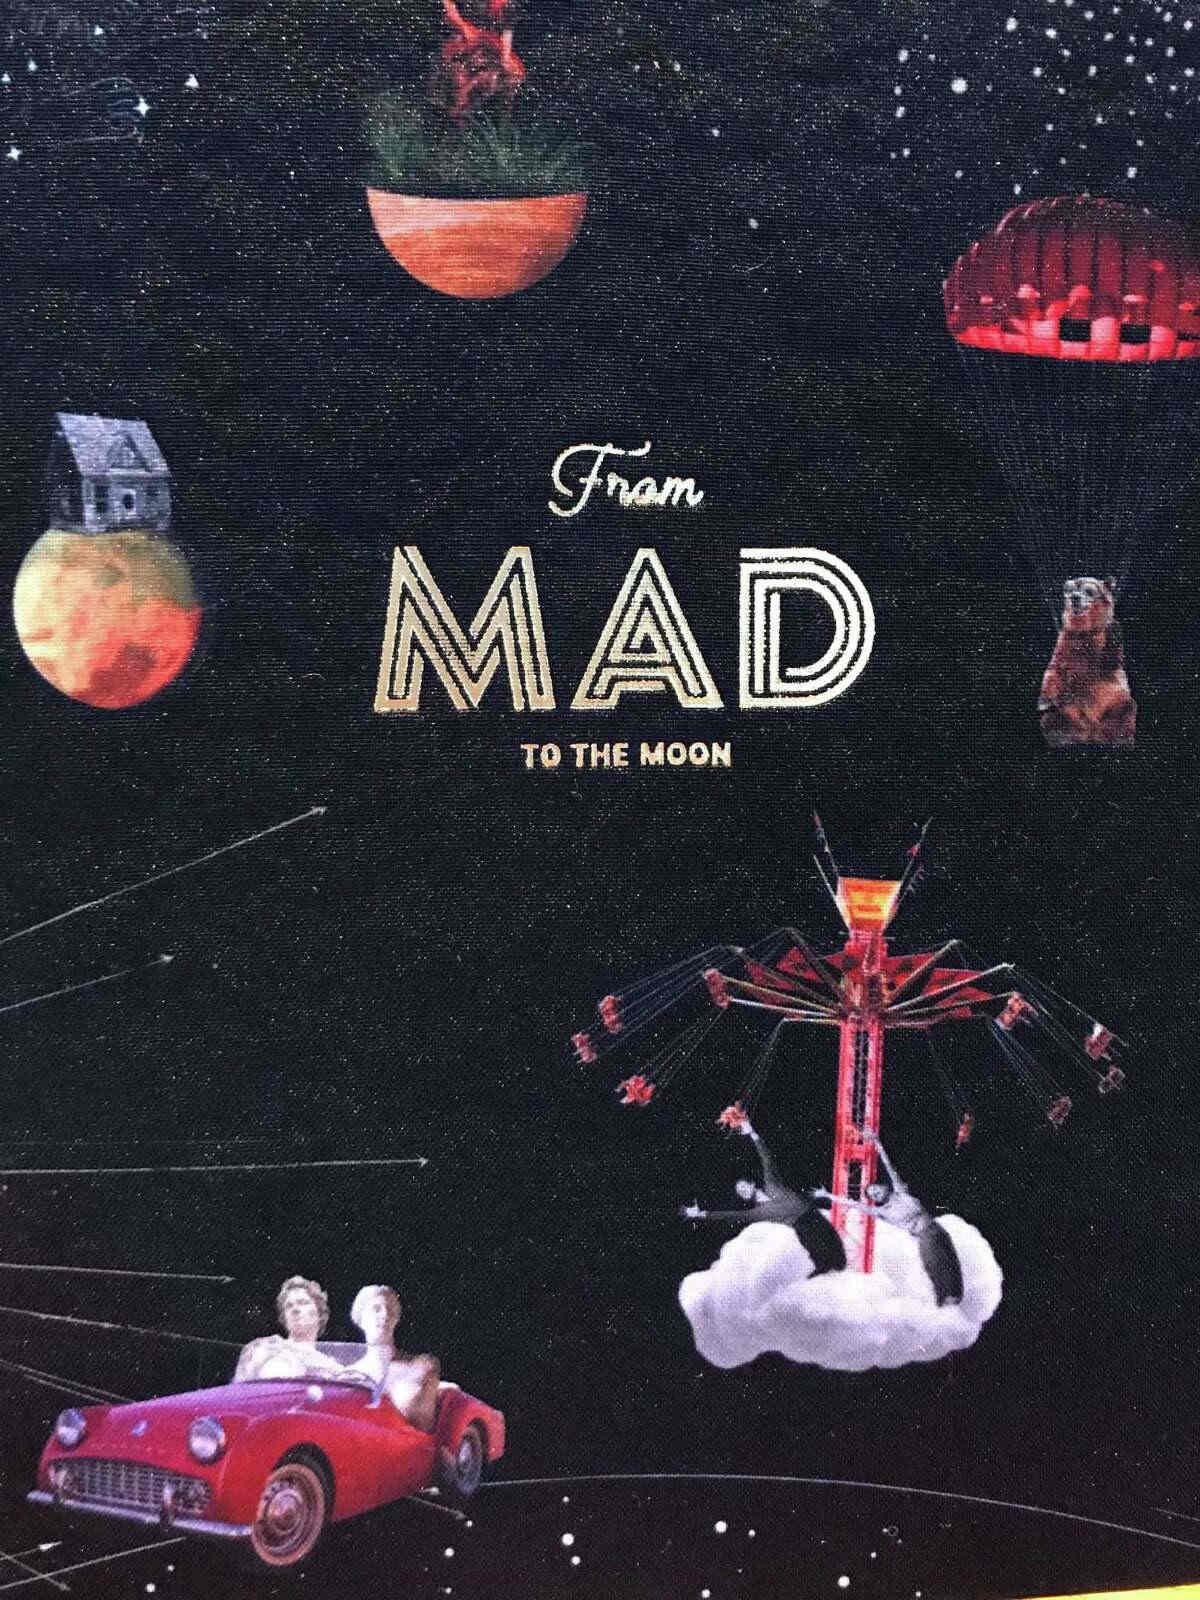 Artwork on the cover of the MAD menu photo